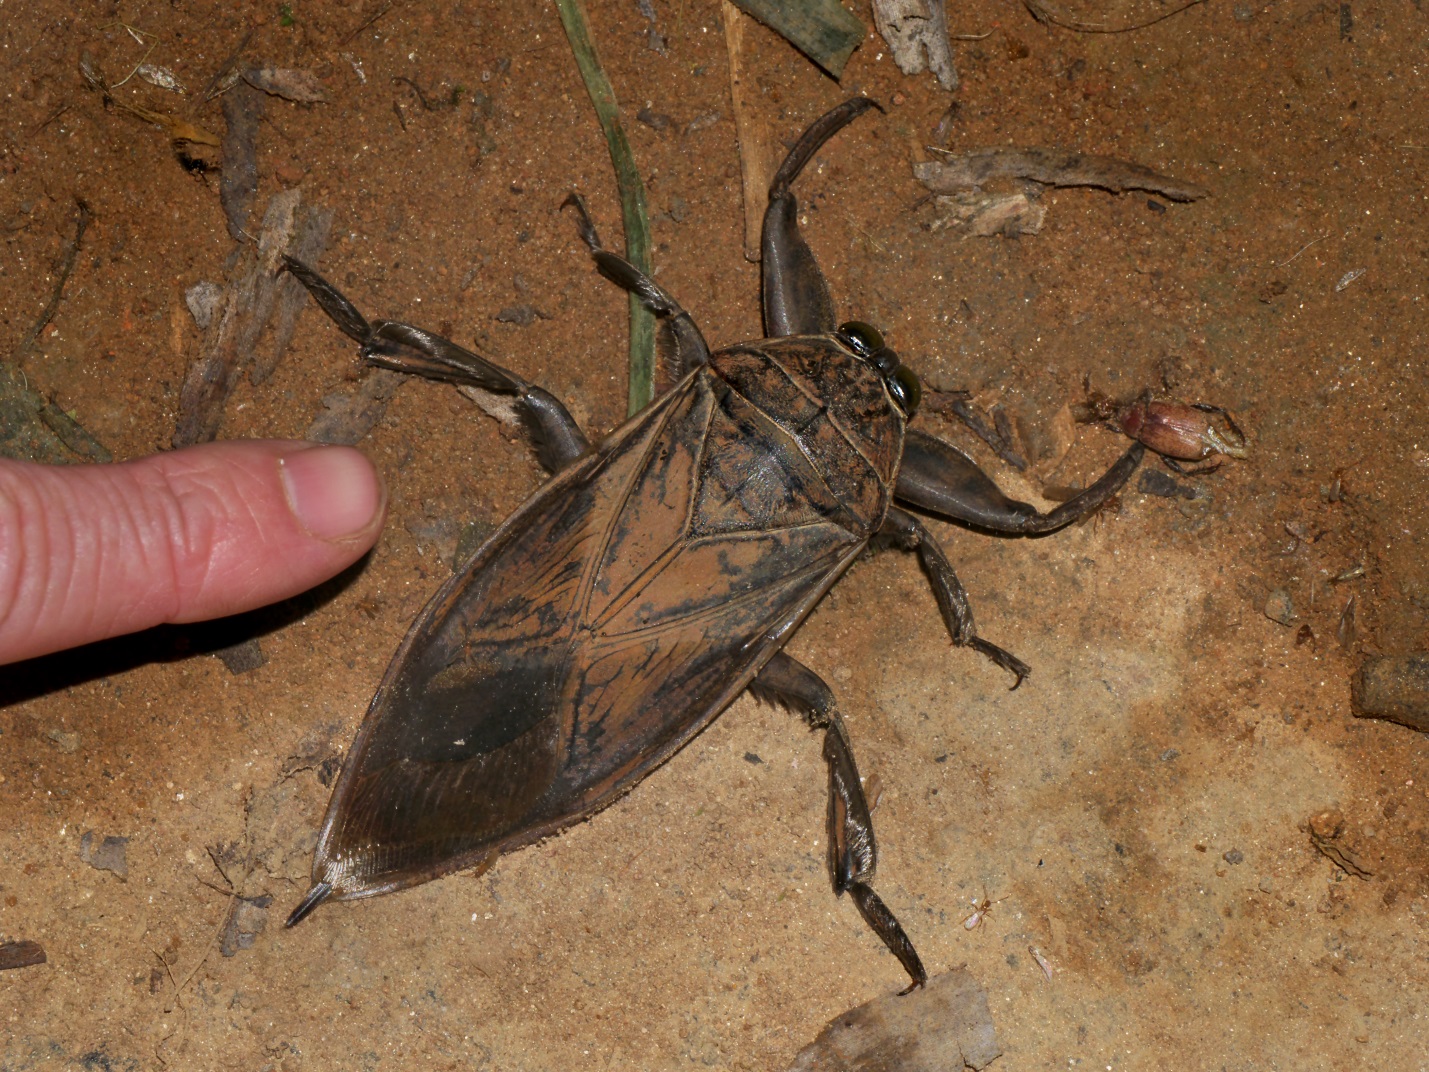 Giant water bug (Belostomatidae), Vohimana reserve, Madagascar by Frank Vassen. Some rights reserved. Check out those huge raptorial forelimbs!